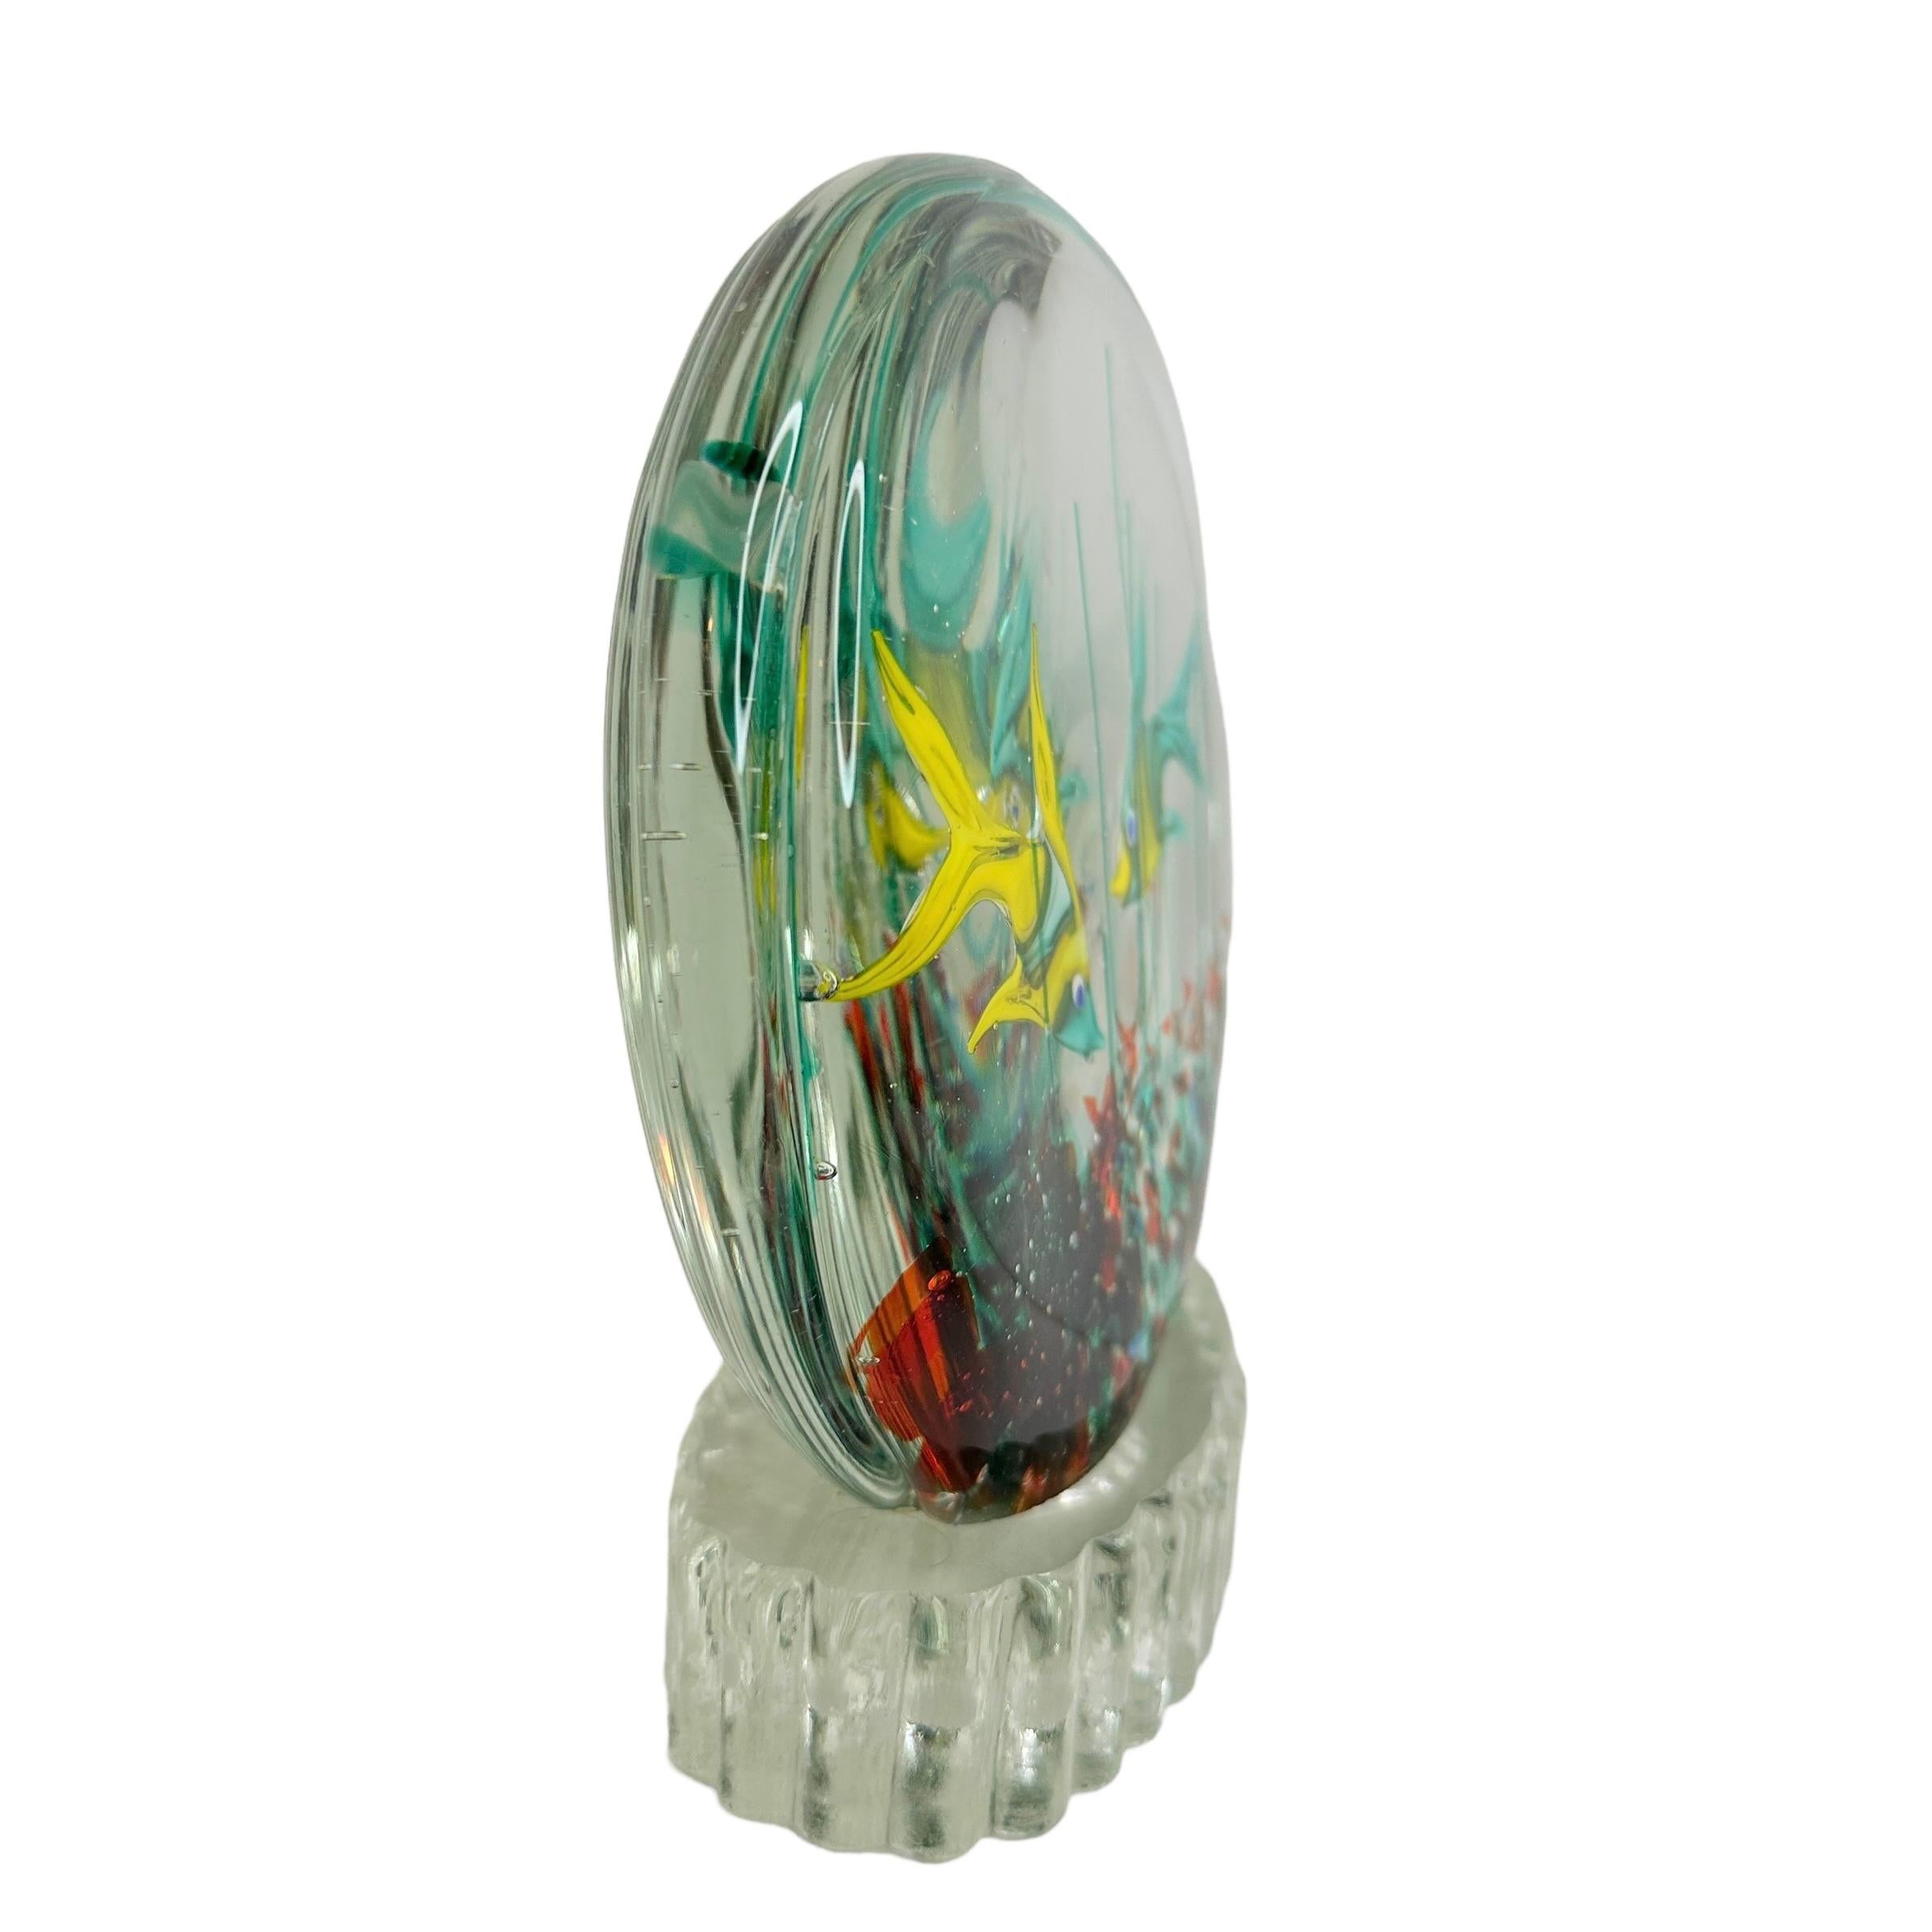 Beautiful Murano hand blown aquarium Italian art glass sculpture. Showing two fish in a reef. Colors are different shades of green, red, Yellow and clear. Created in the manner of designer Riccardo Licata. The fish are sandwiched in glass layers,